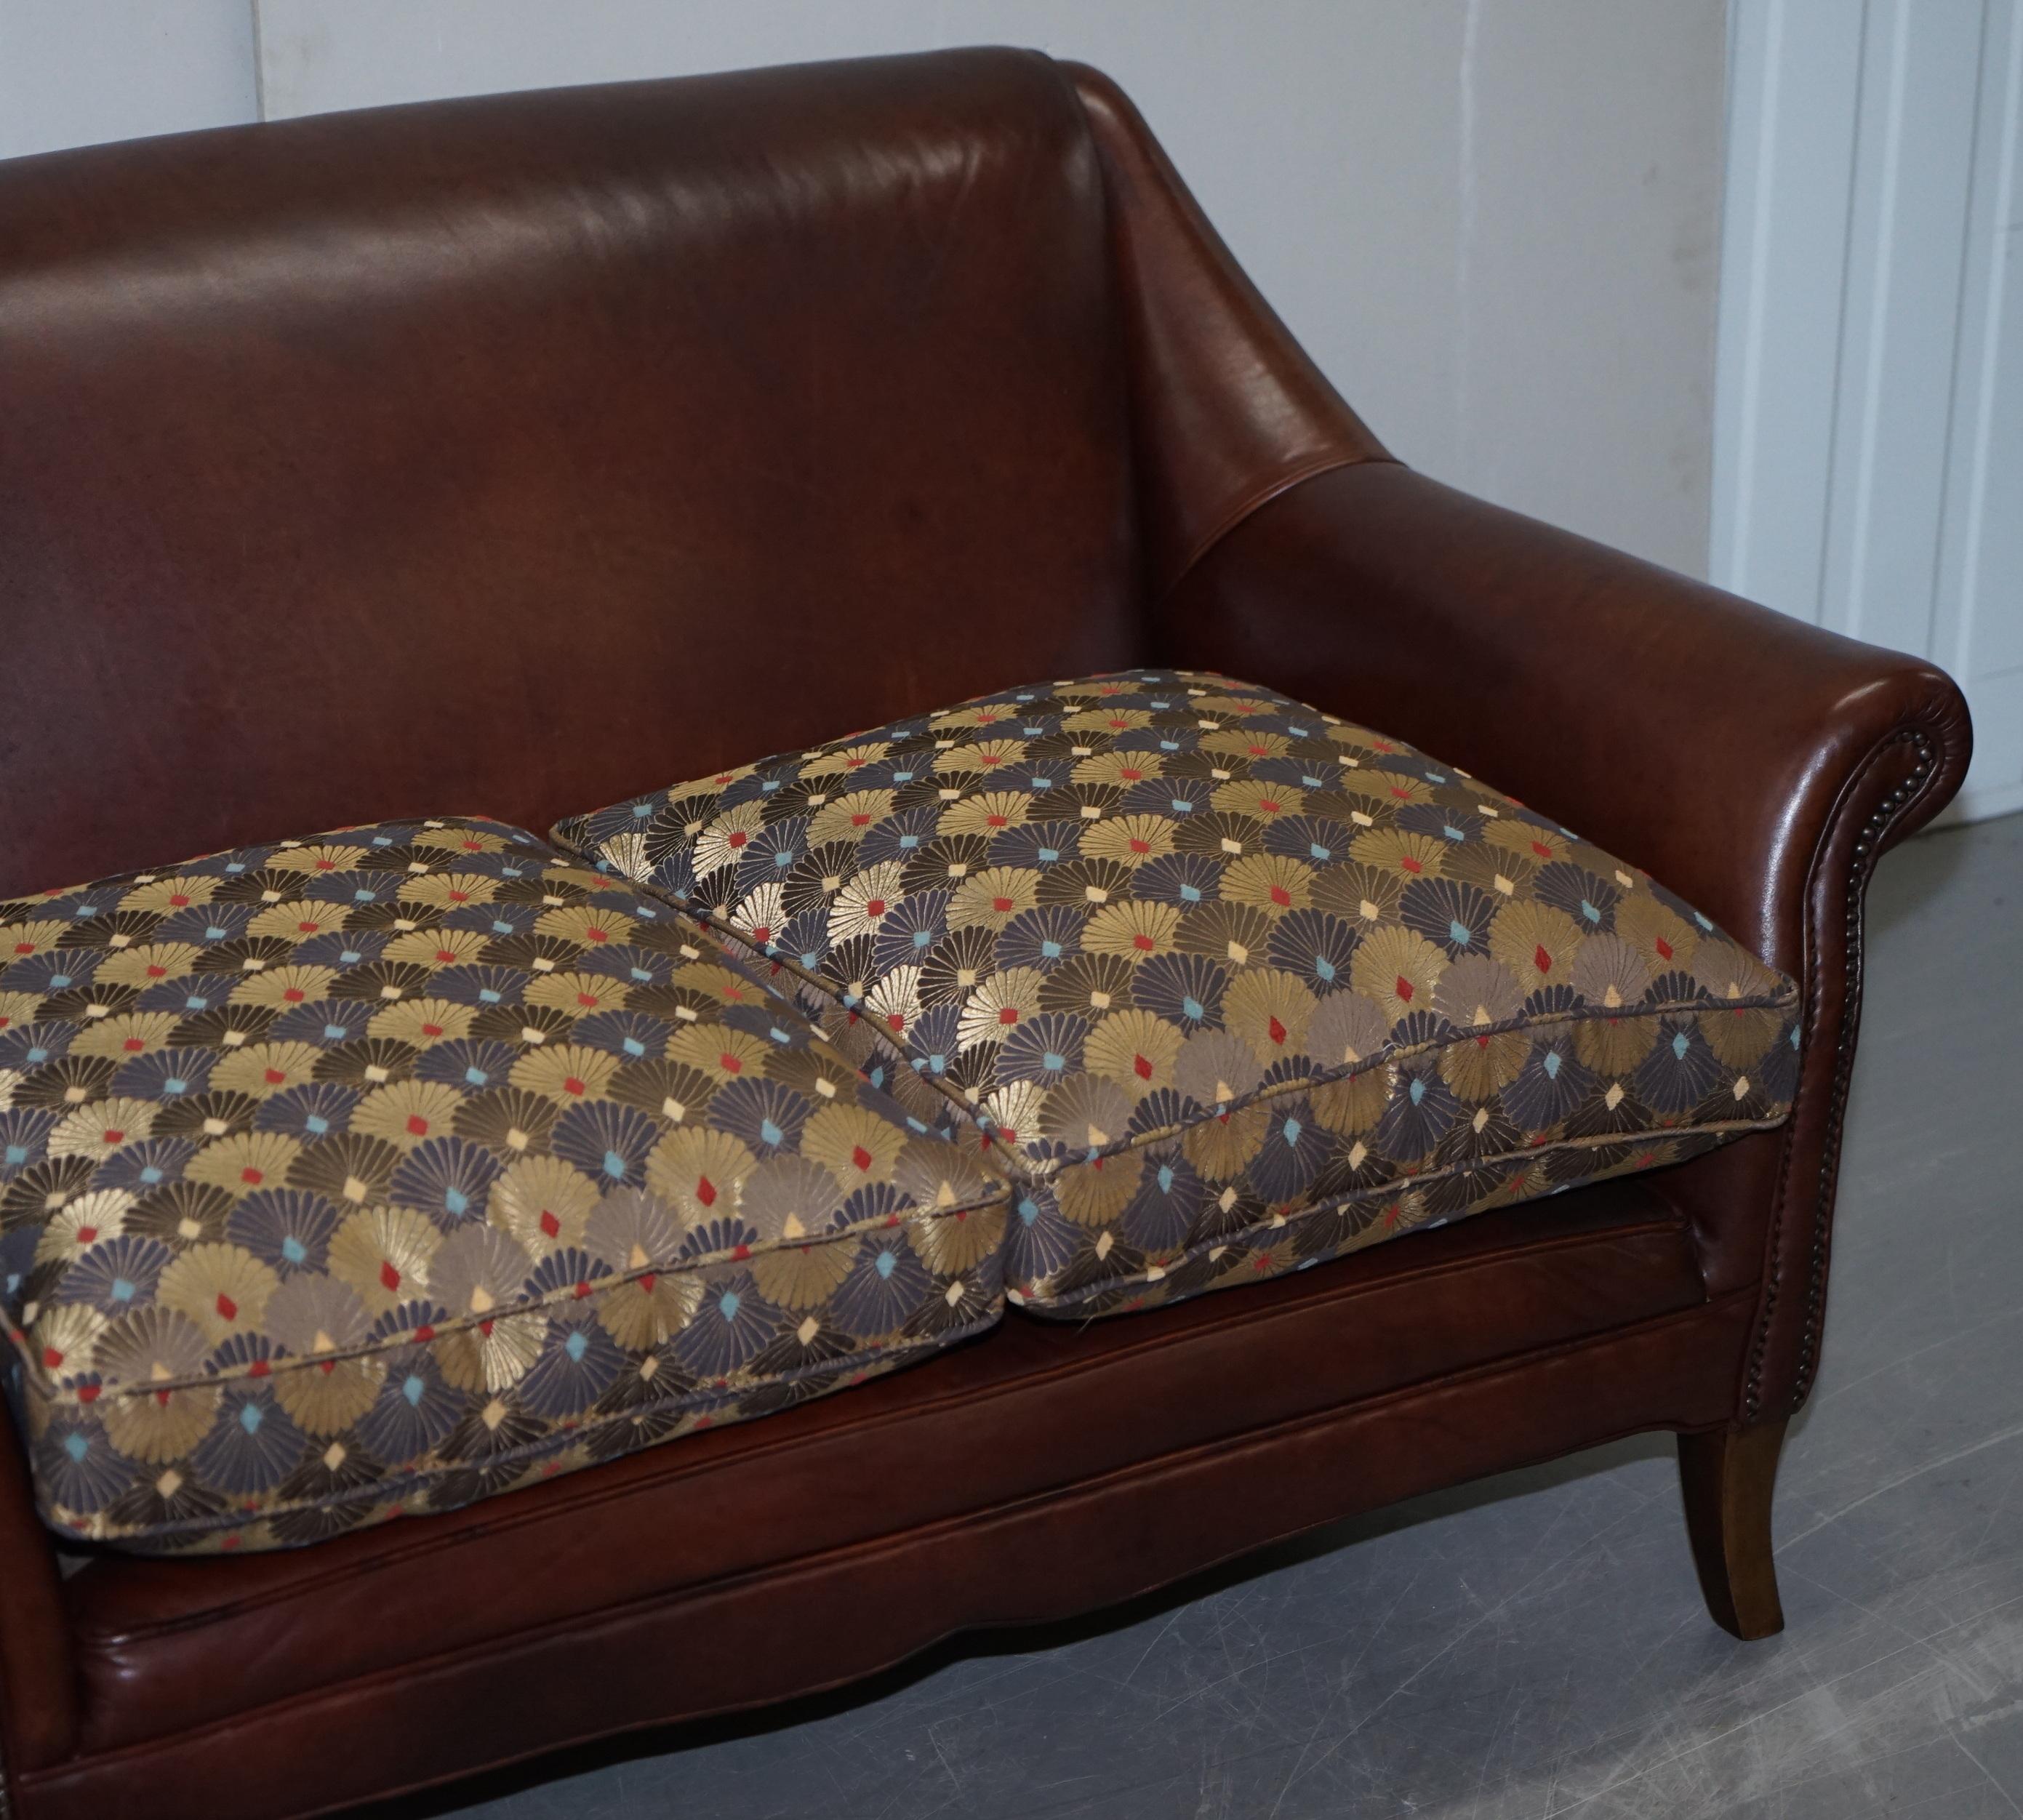 English Vintage Aged Brown Leather Sofa with Liberty's of London Upholstered Cushions